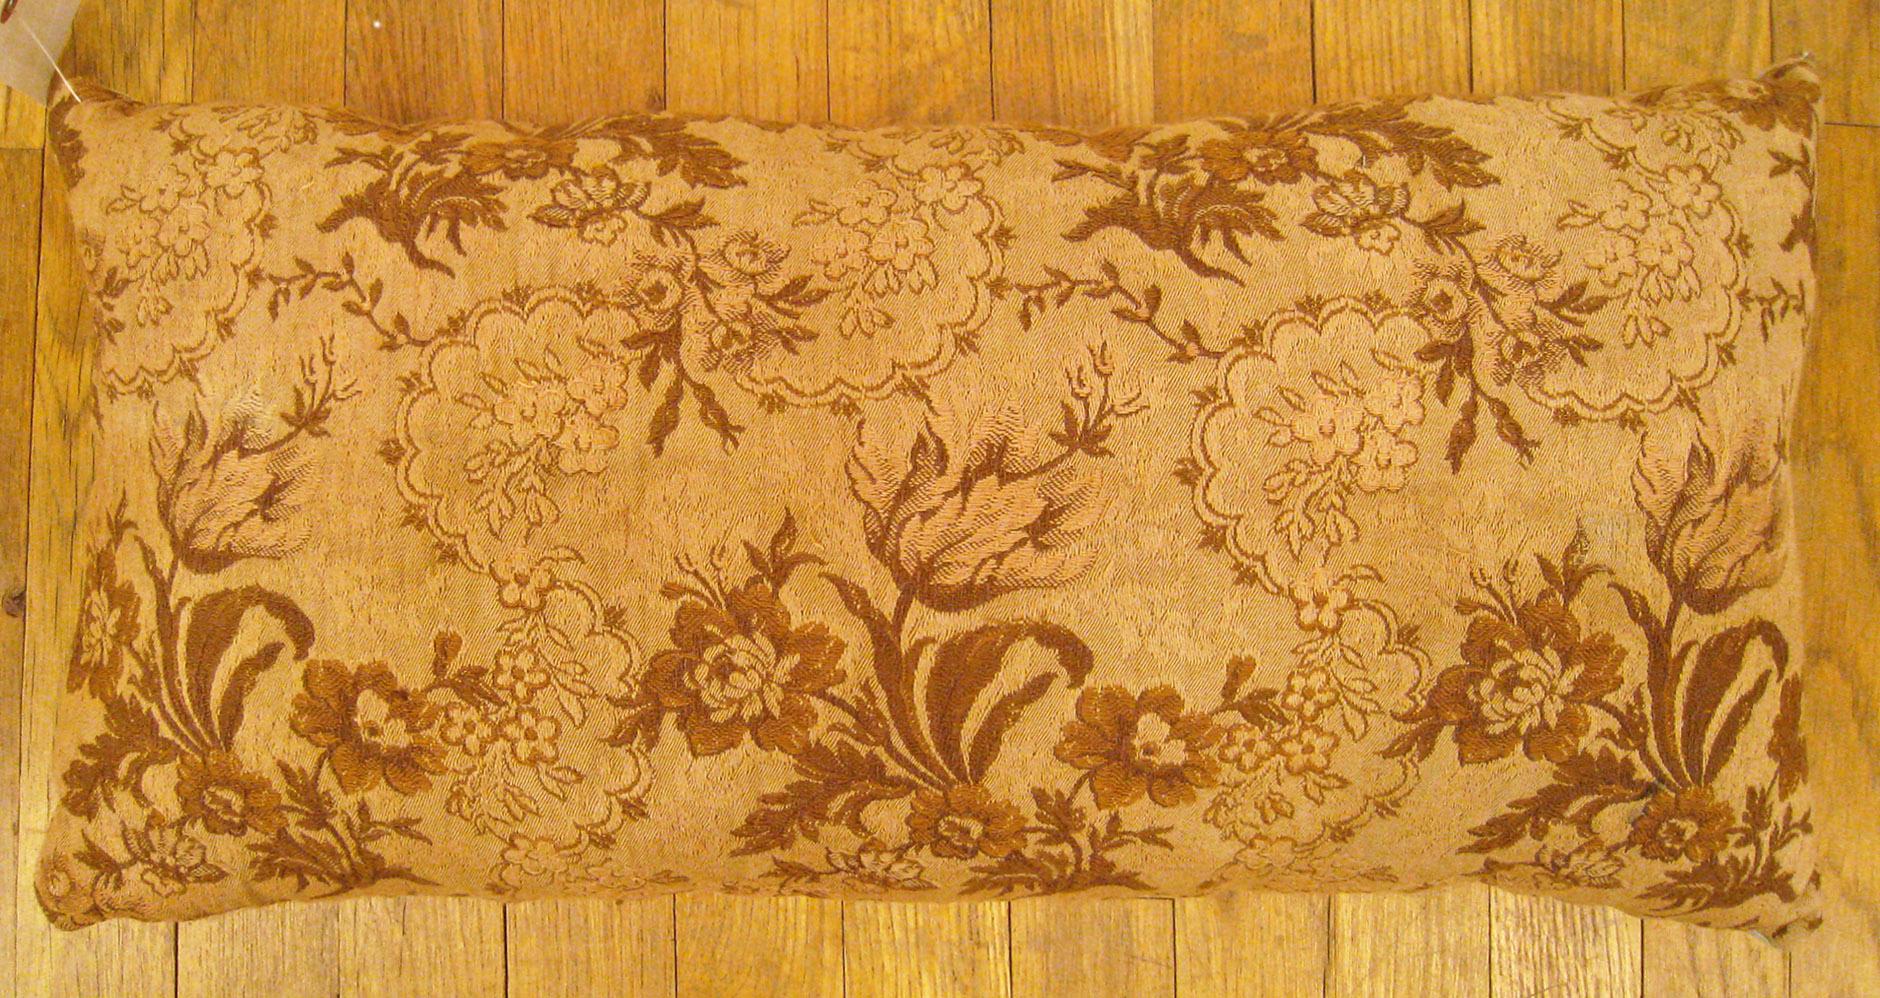 Antique Jacquard Tapestry Pillow; size 1'1” x 2'0”. 

An antique decorative pillow with floral elements allover a light brown central field, size 1'1